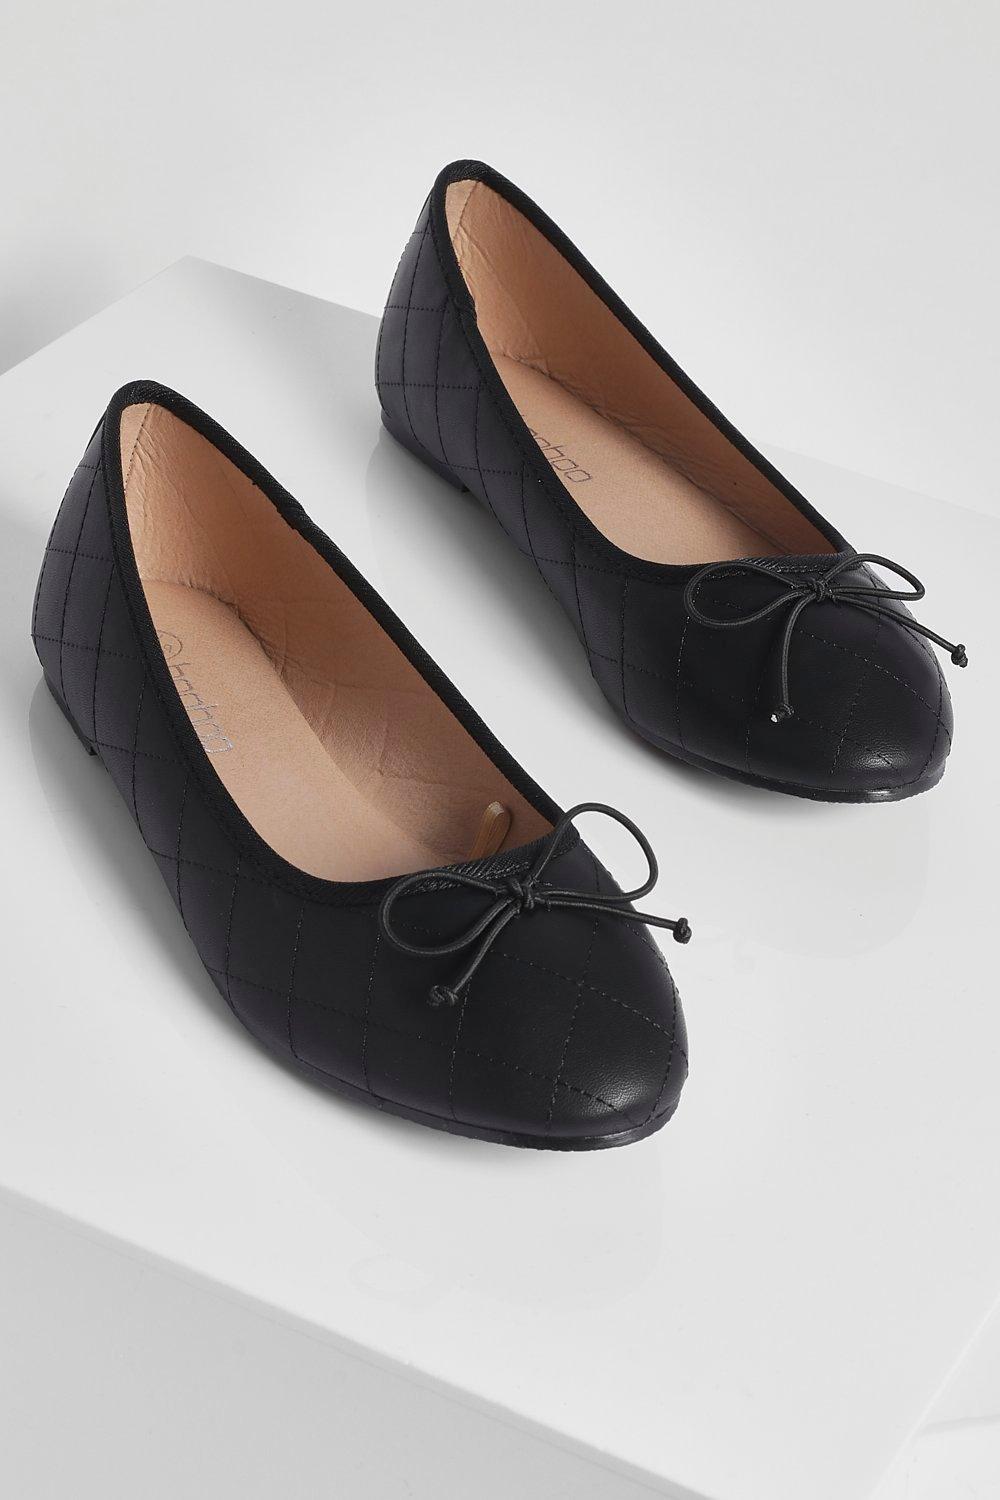 Blue Boohoo Quilted Bow Ballet Flats in Black Womens Shoes Flats and flat shoes Ballet flats and ballerina shoes 